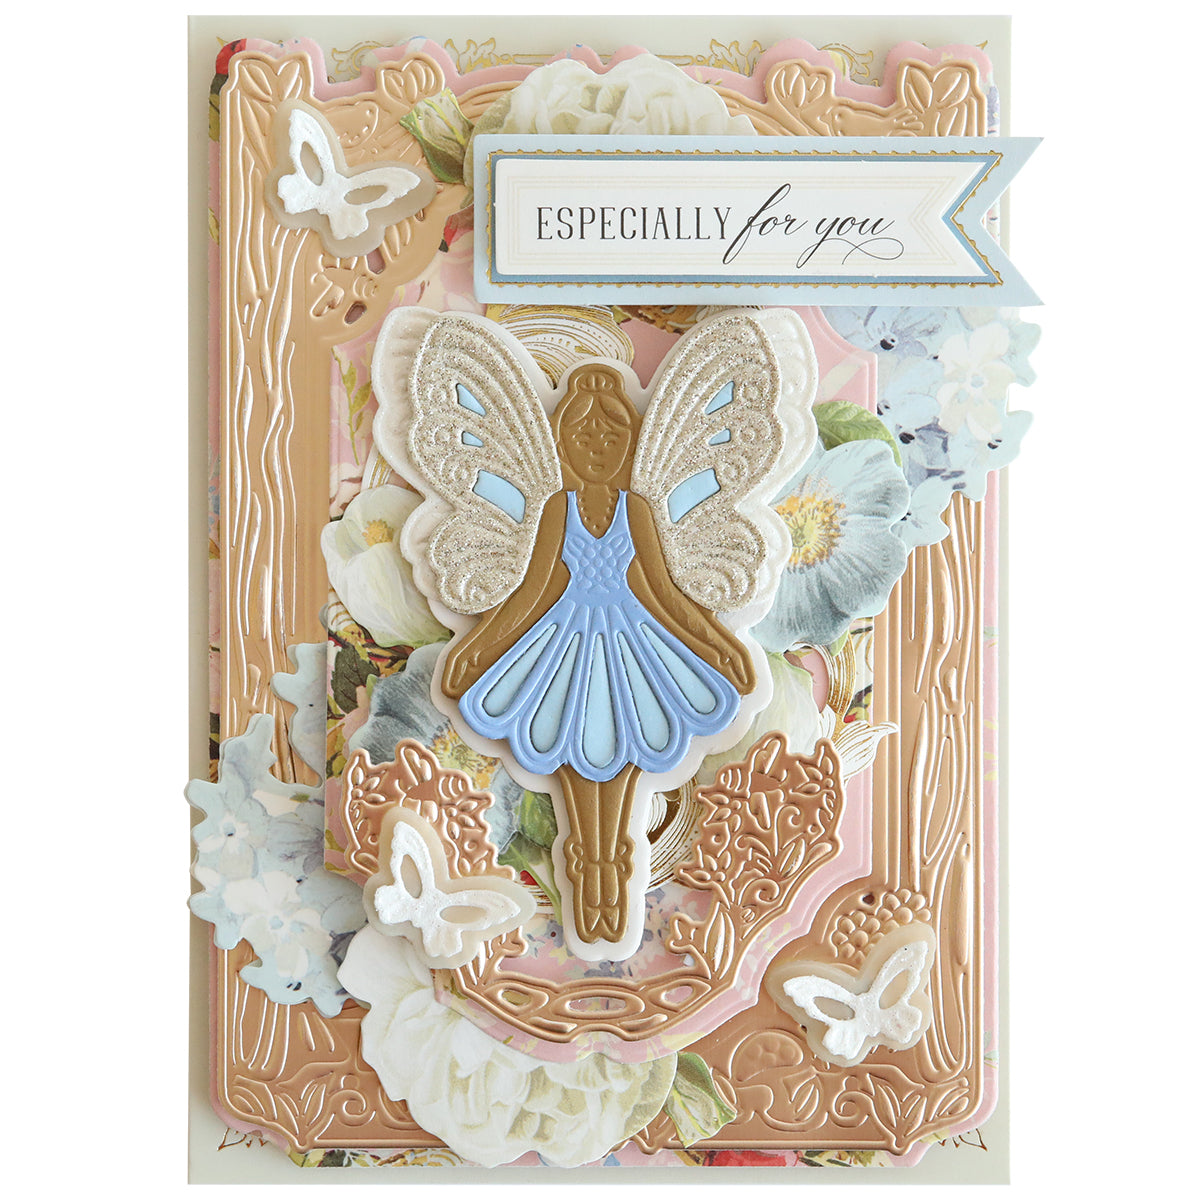 Elaborate greeting card with 3D Fairy Scene Dies design, sprinkled with pixie dust, and an "especially for you" message.